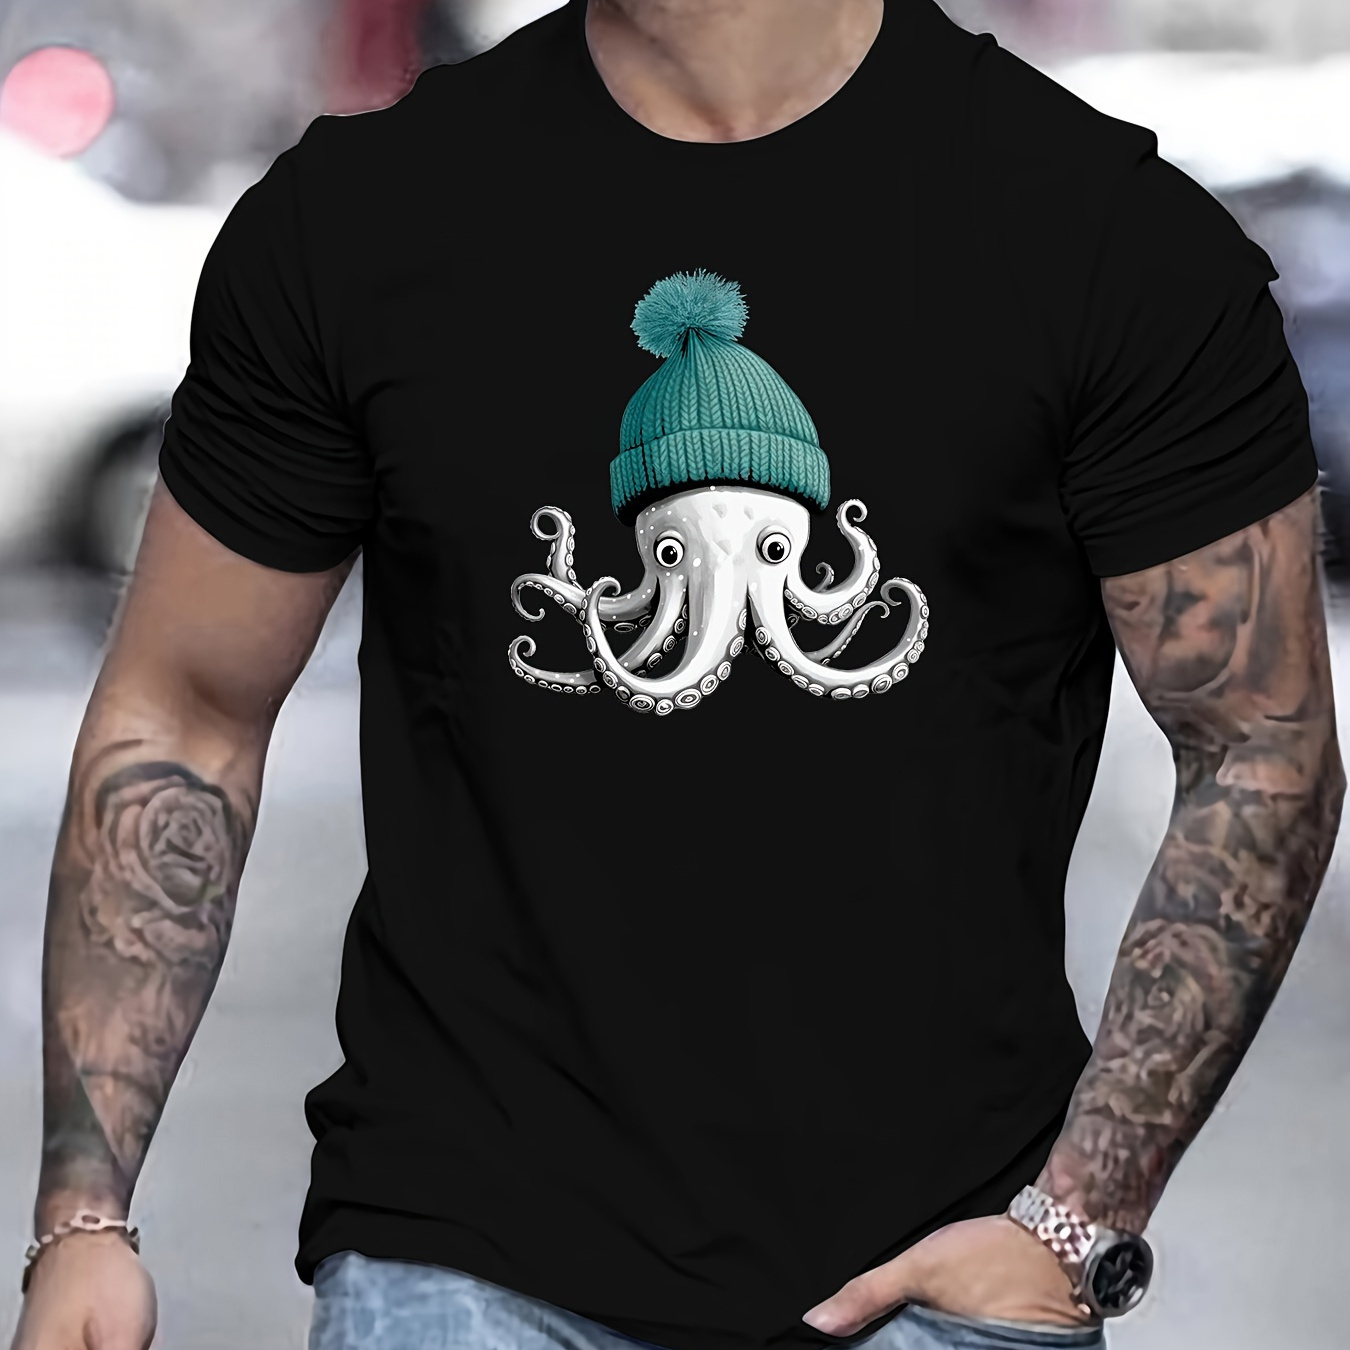 

Octopus Print, Men's Round Crew Neck Short Sleeve, Simple Style Tee Fashion Regular Fit T-shirt, Casual Comfy Top For Spring Summer Holiday Leisure Vacation Men's Clothing As Gift